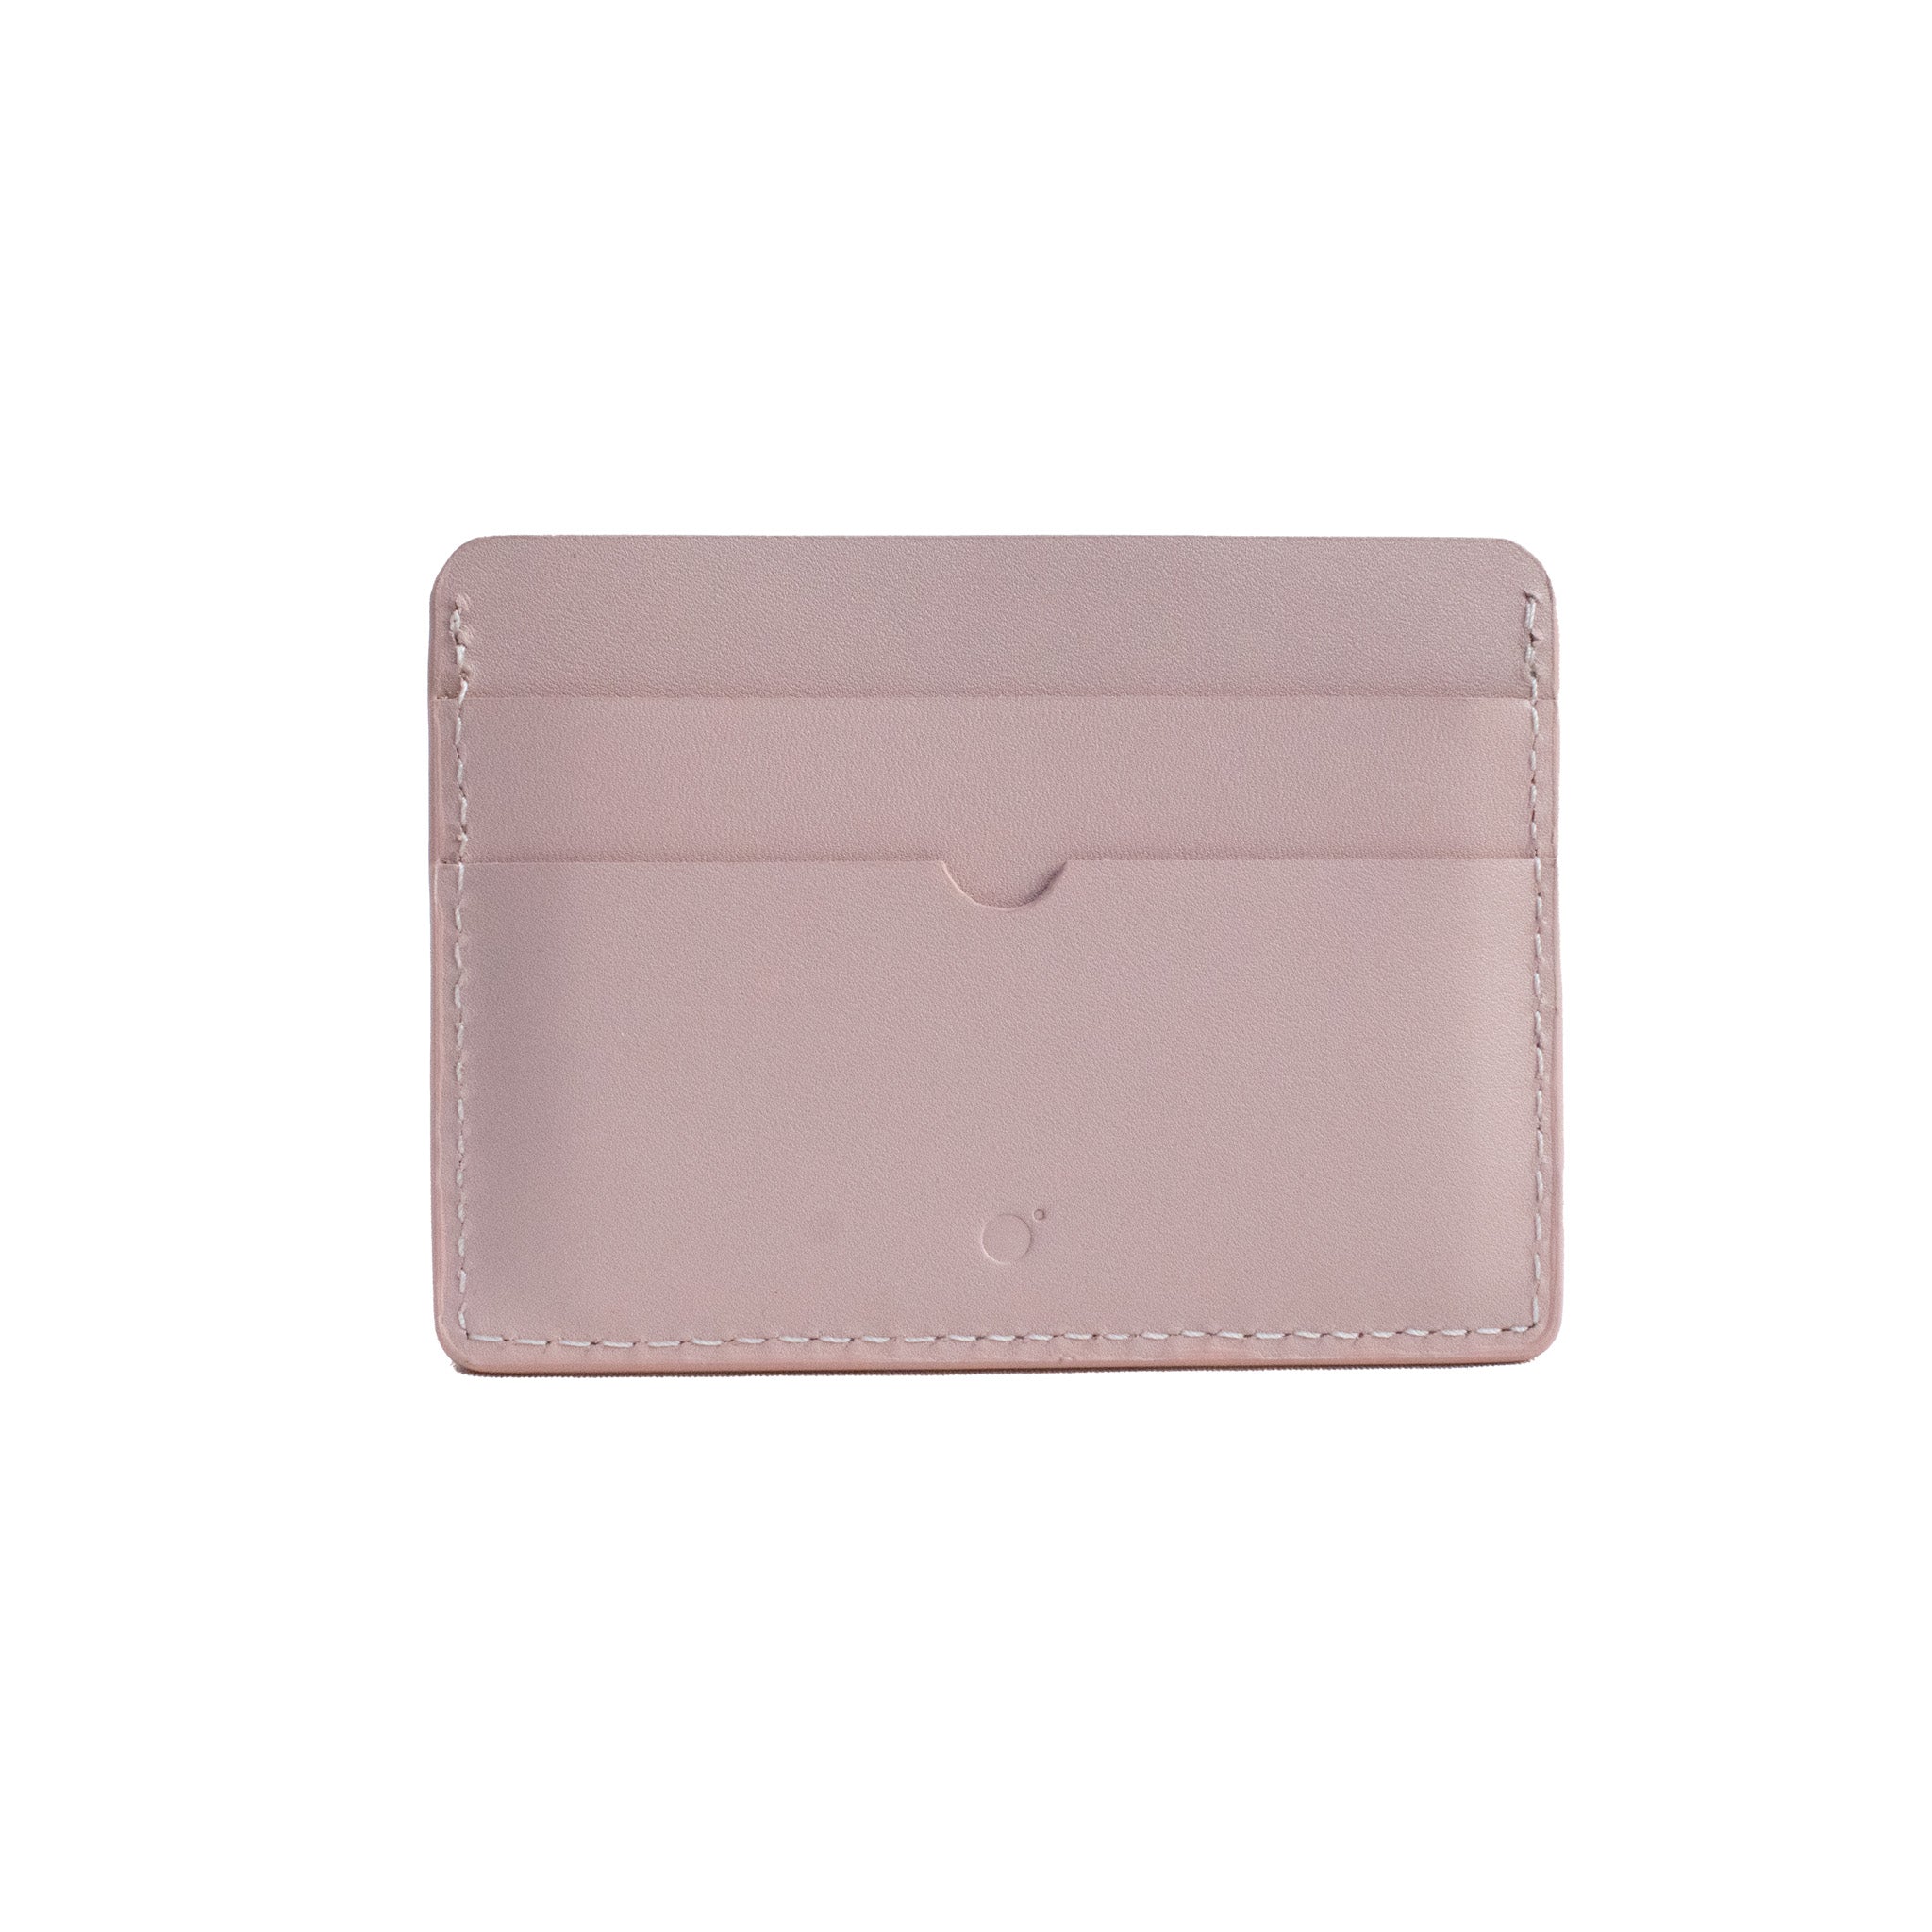 Card Case in Nude Pink